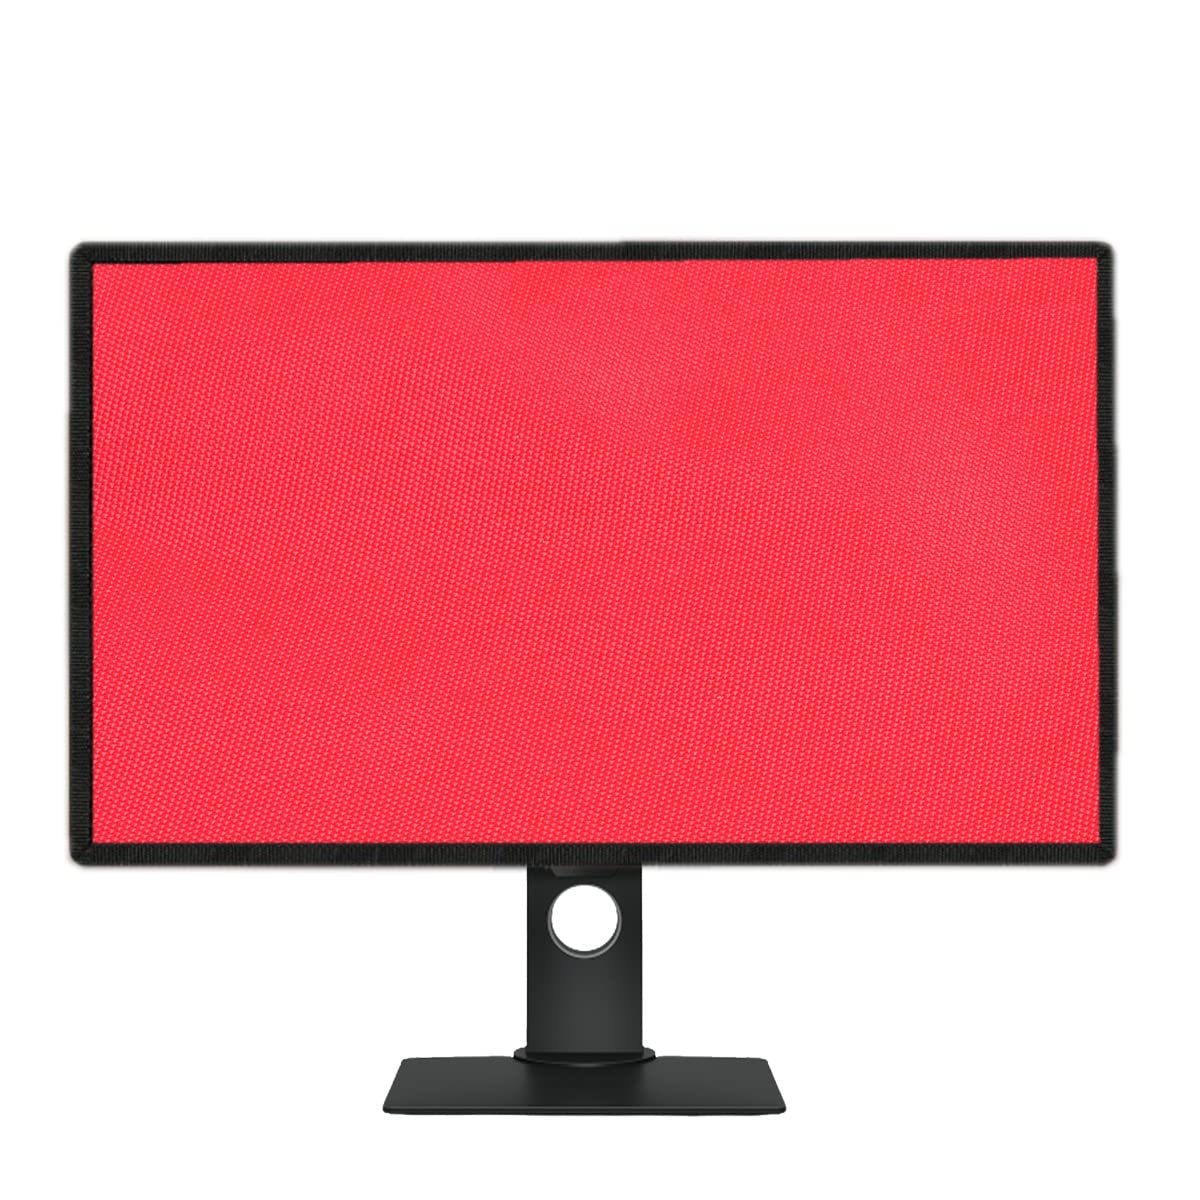 PalaP Super Premium Dust Proof Monitor Cover for Lenovo 24 inches Monitor (RED)